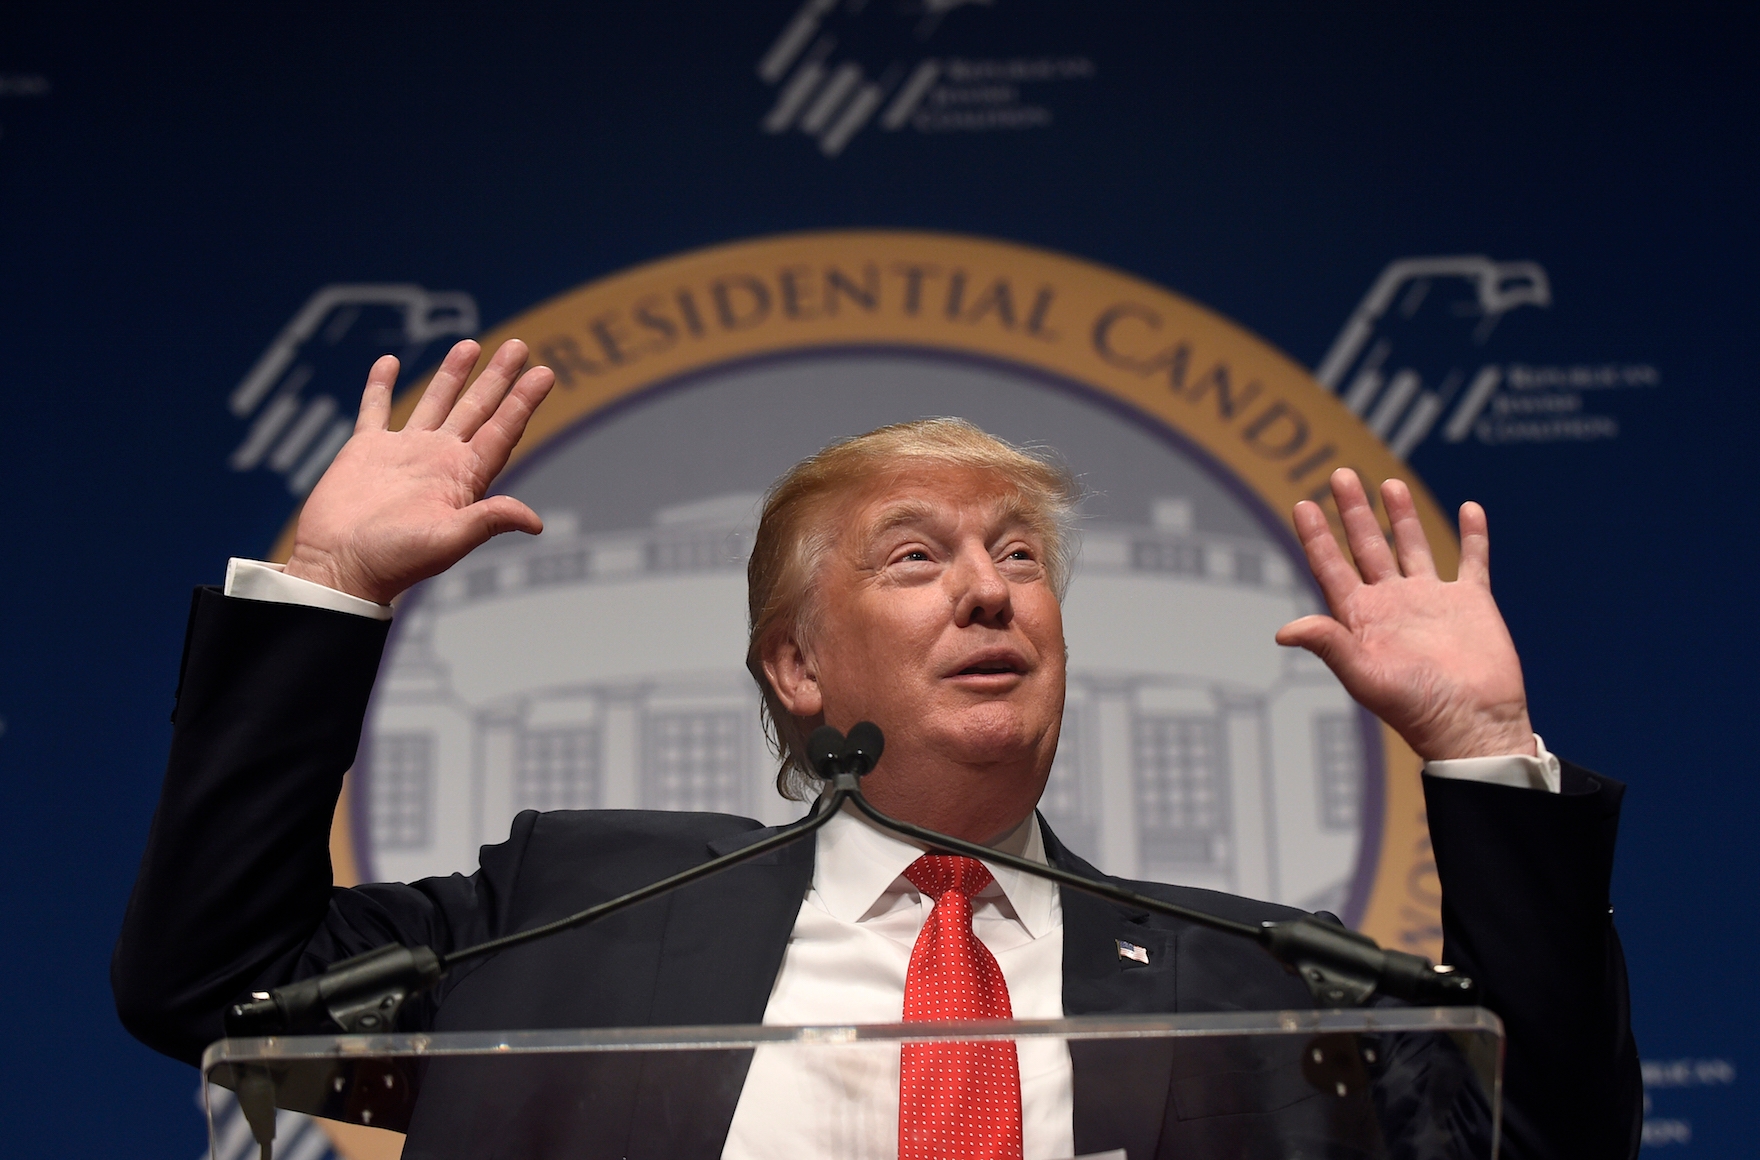 Republican presidential candidate Donald Trump speaking at the Republican Jewish Coalition candidates’ forum in Washington, Dec. 3, 2015. (AP Photo/Susan Walsh)